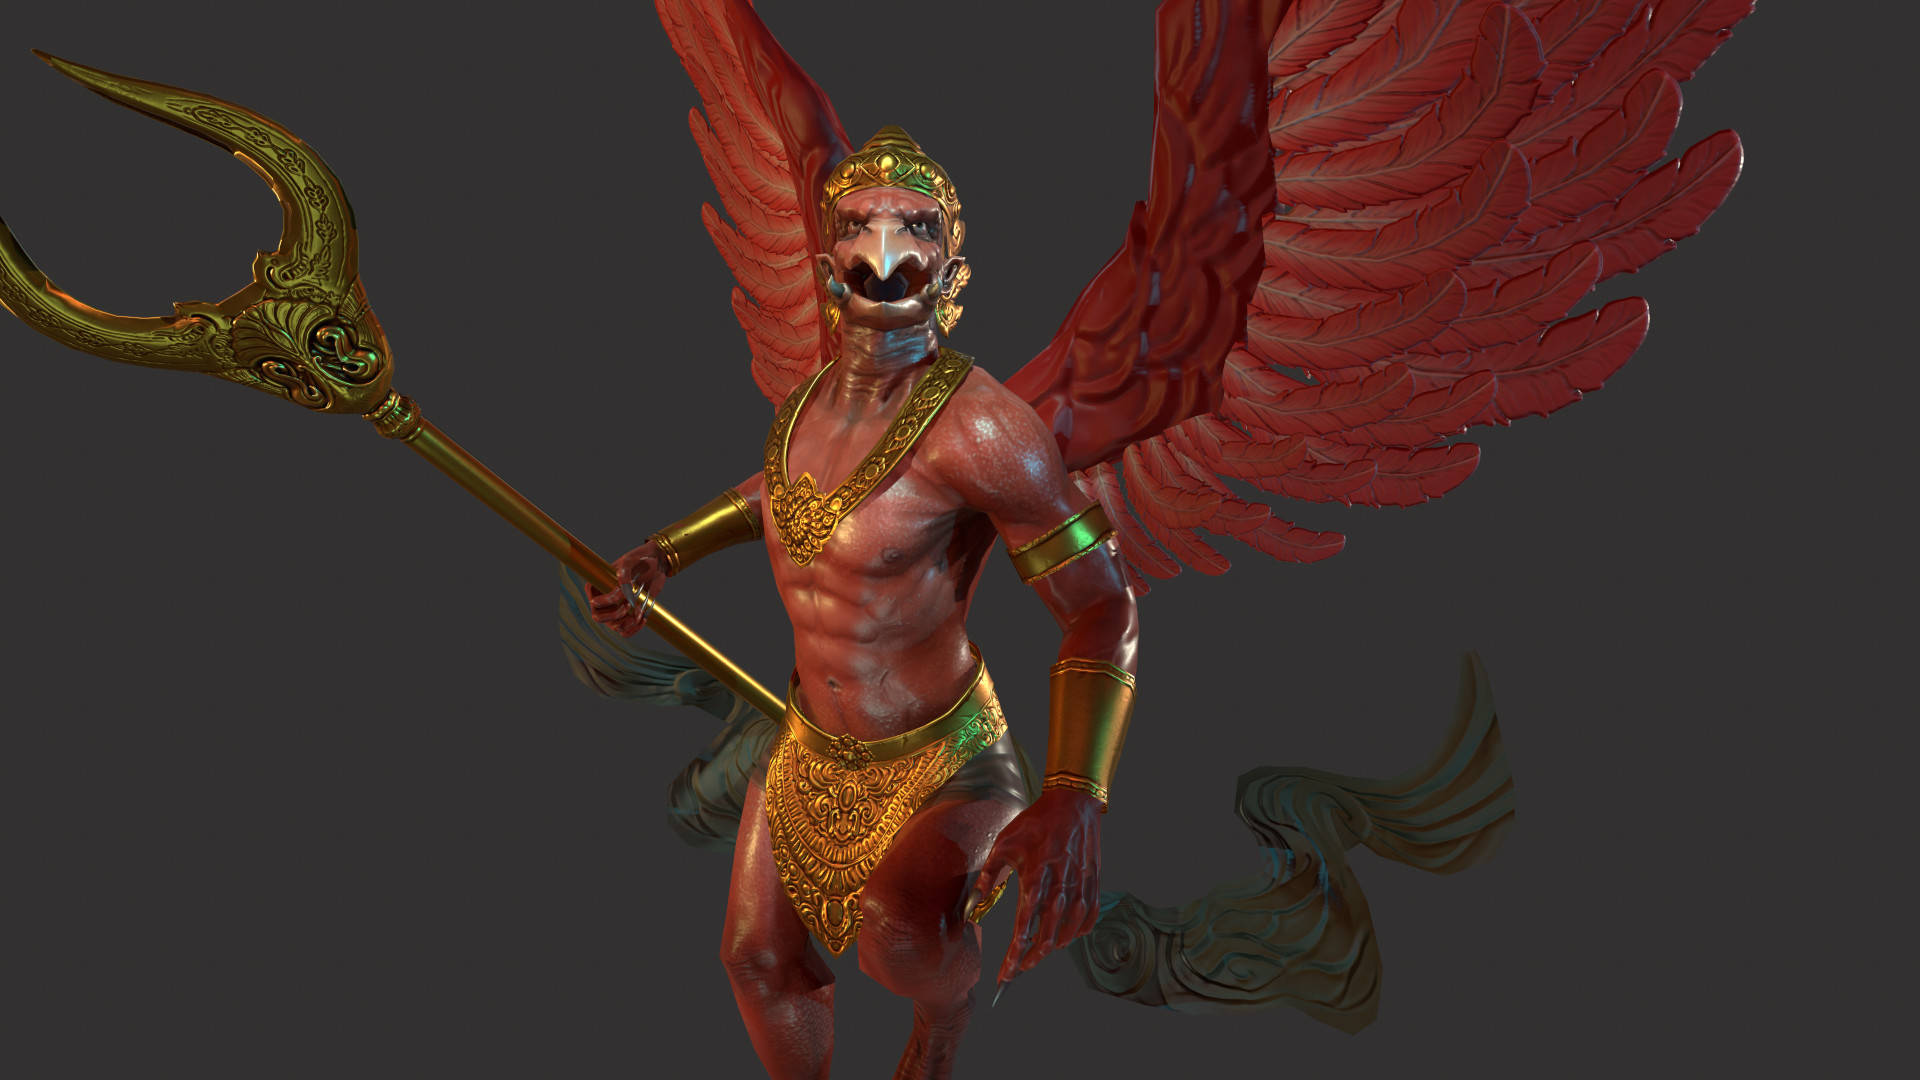 3d Rendered Lord Garuda Picture